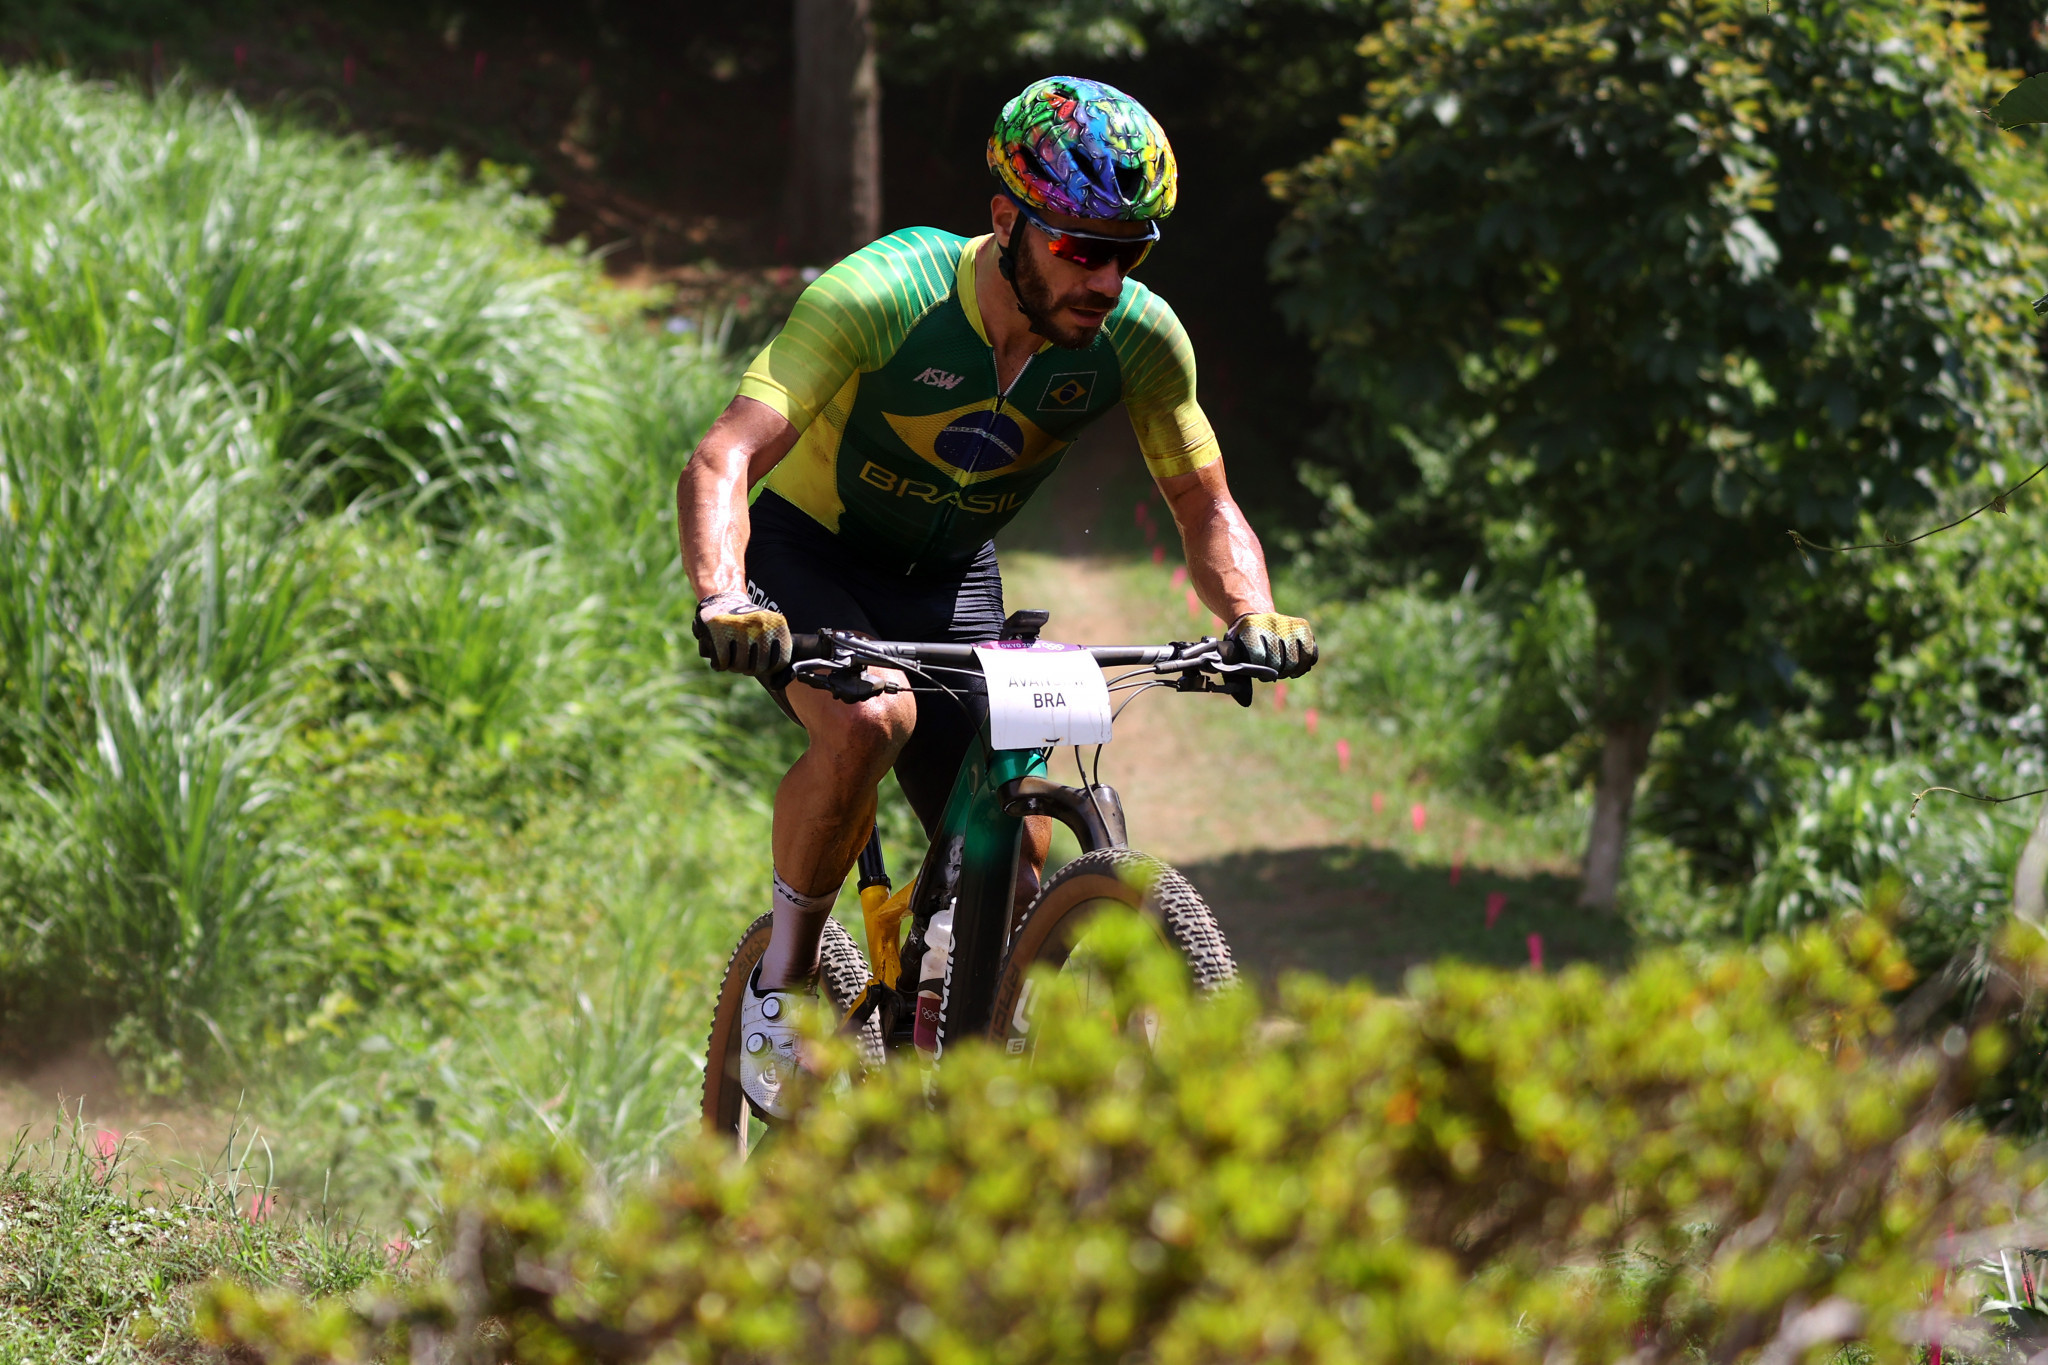 Rousing reception expected for Avancini at first Mountain Bike World Cup in Brazil since 2005